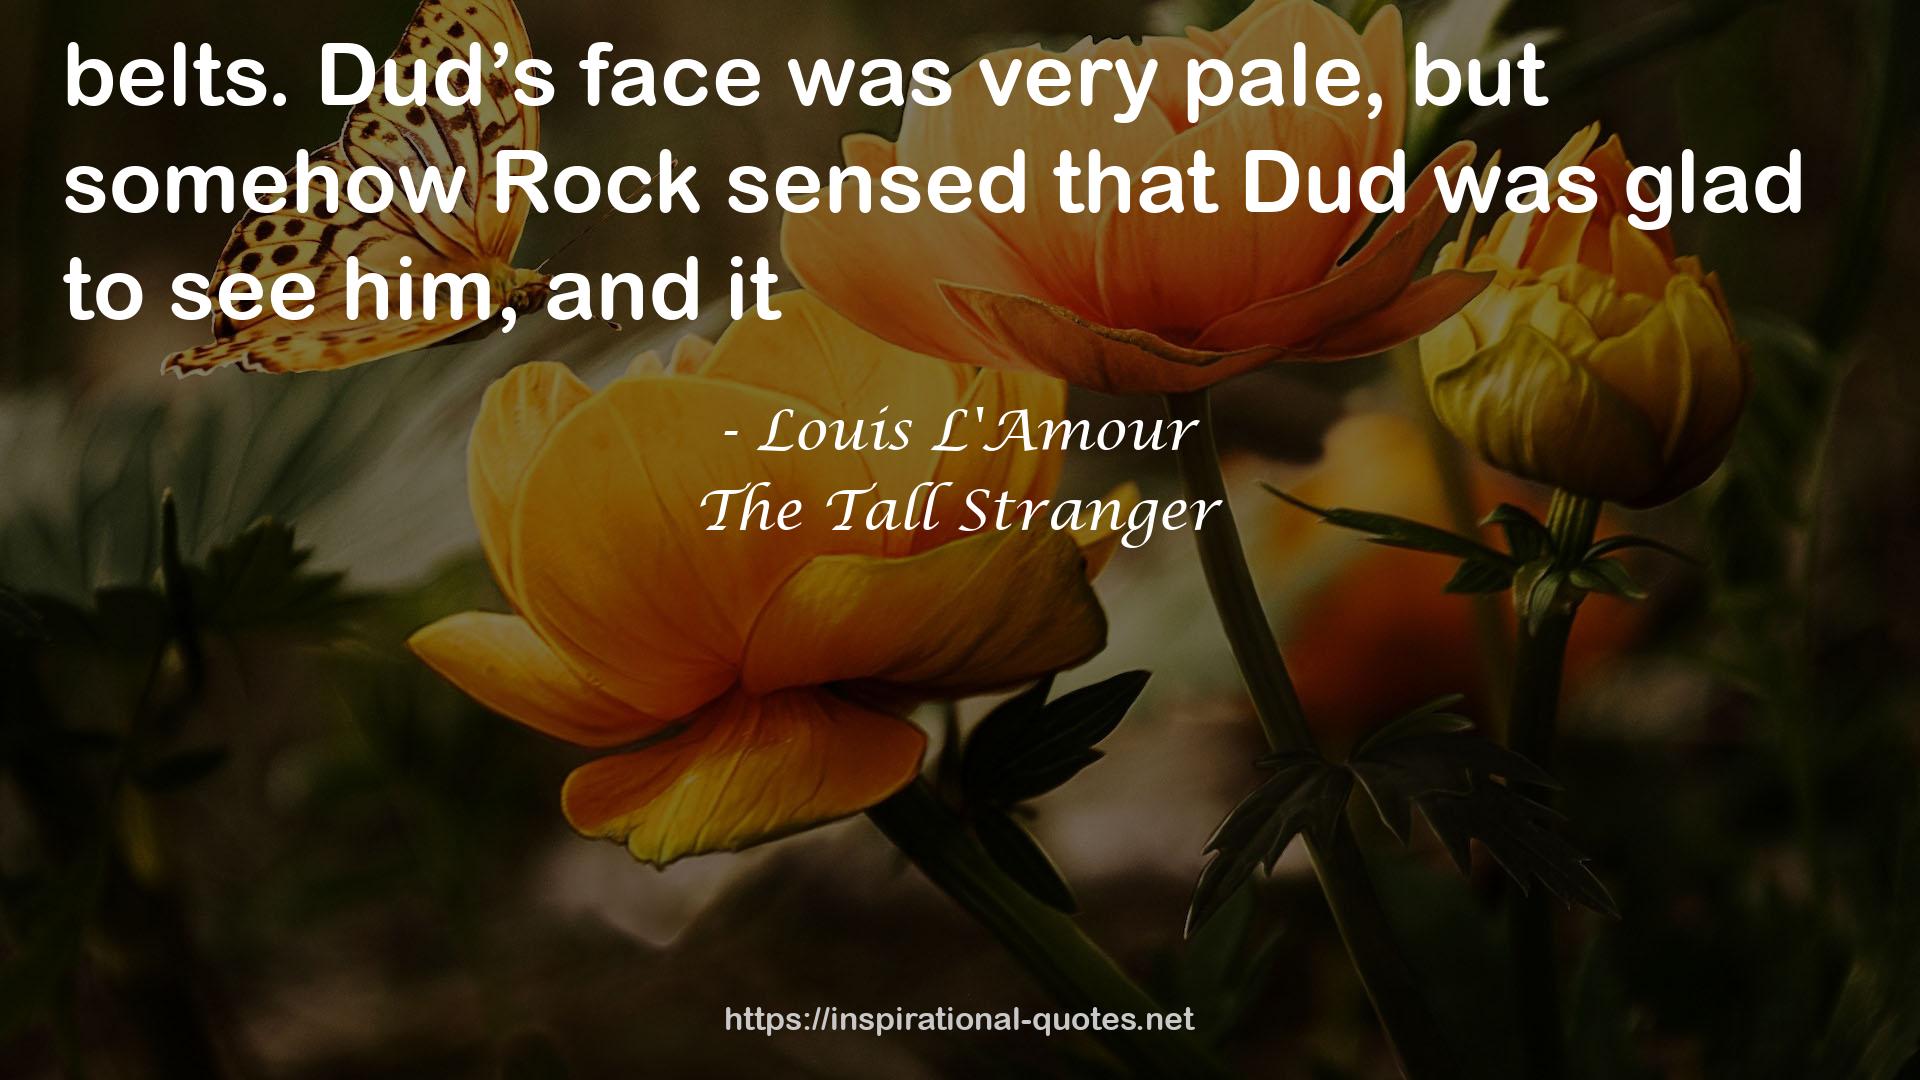 The Tall Stranger QUOTES